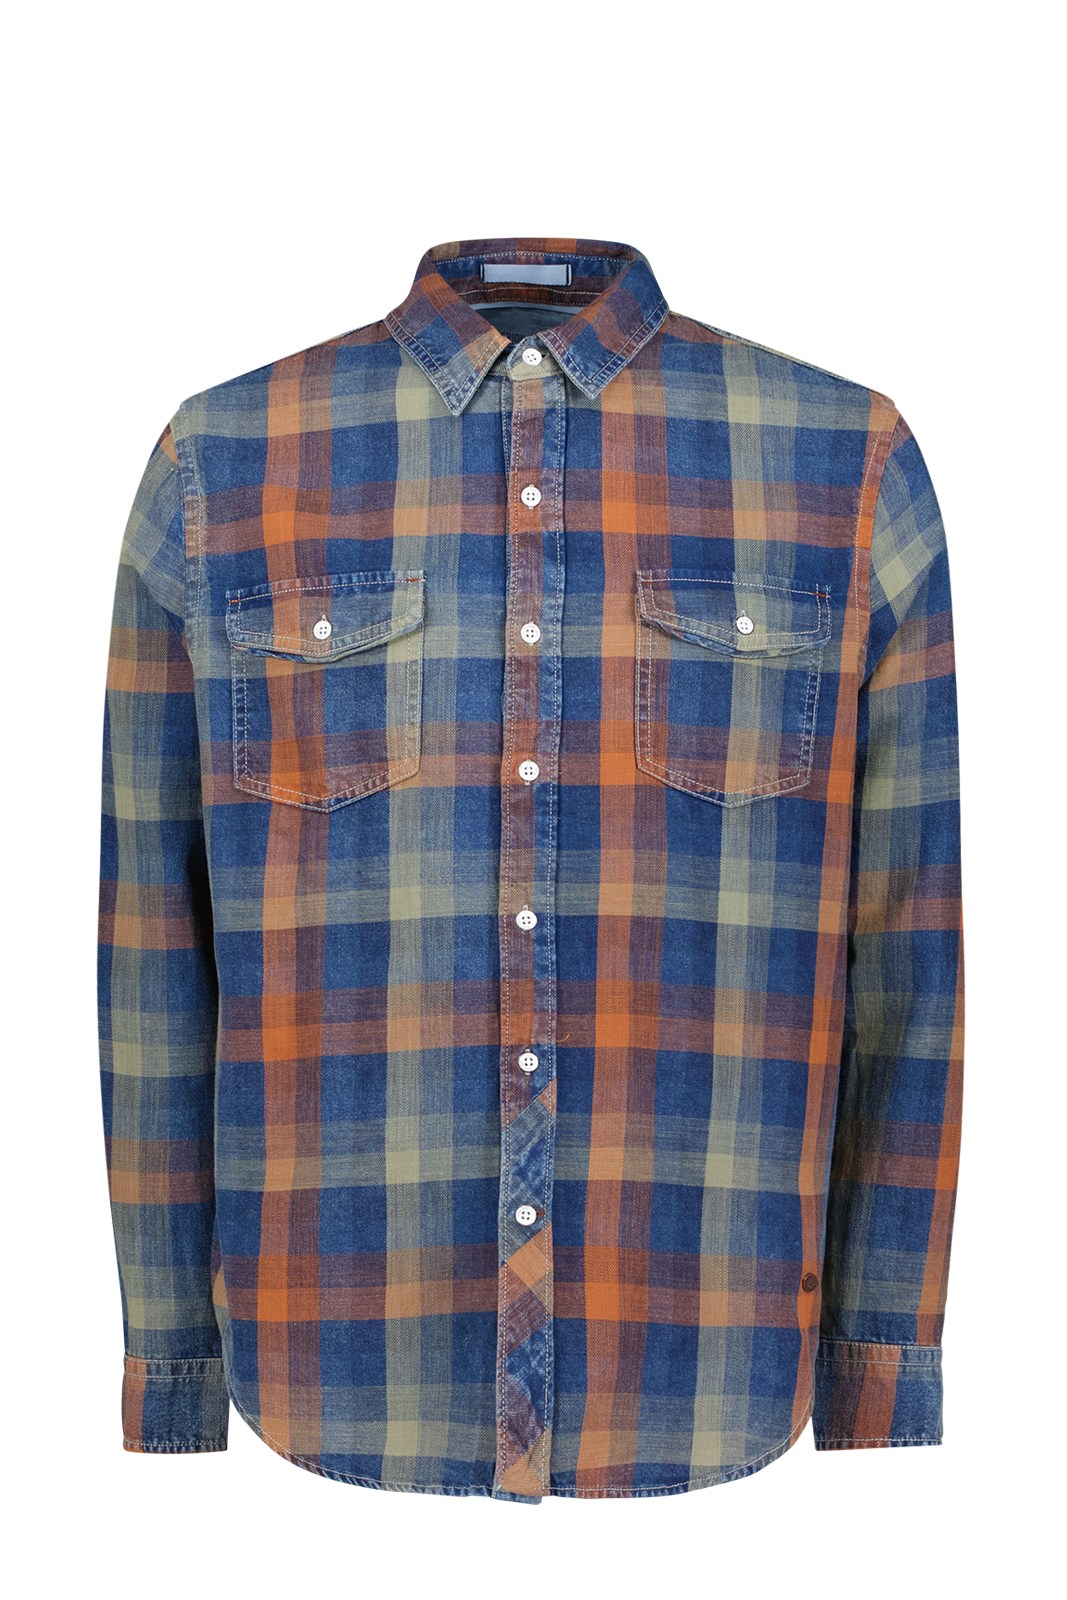 LONG SLEEVE 2 POCKET SHIRT - RUST - Kingfisher Road - Online Boutique